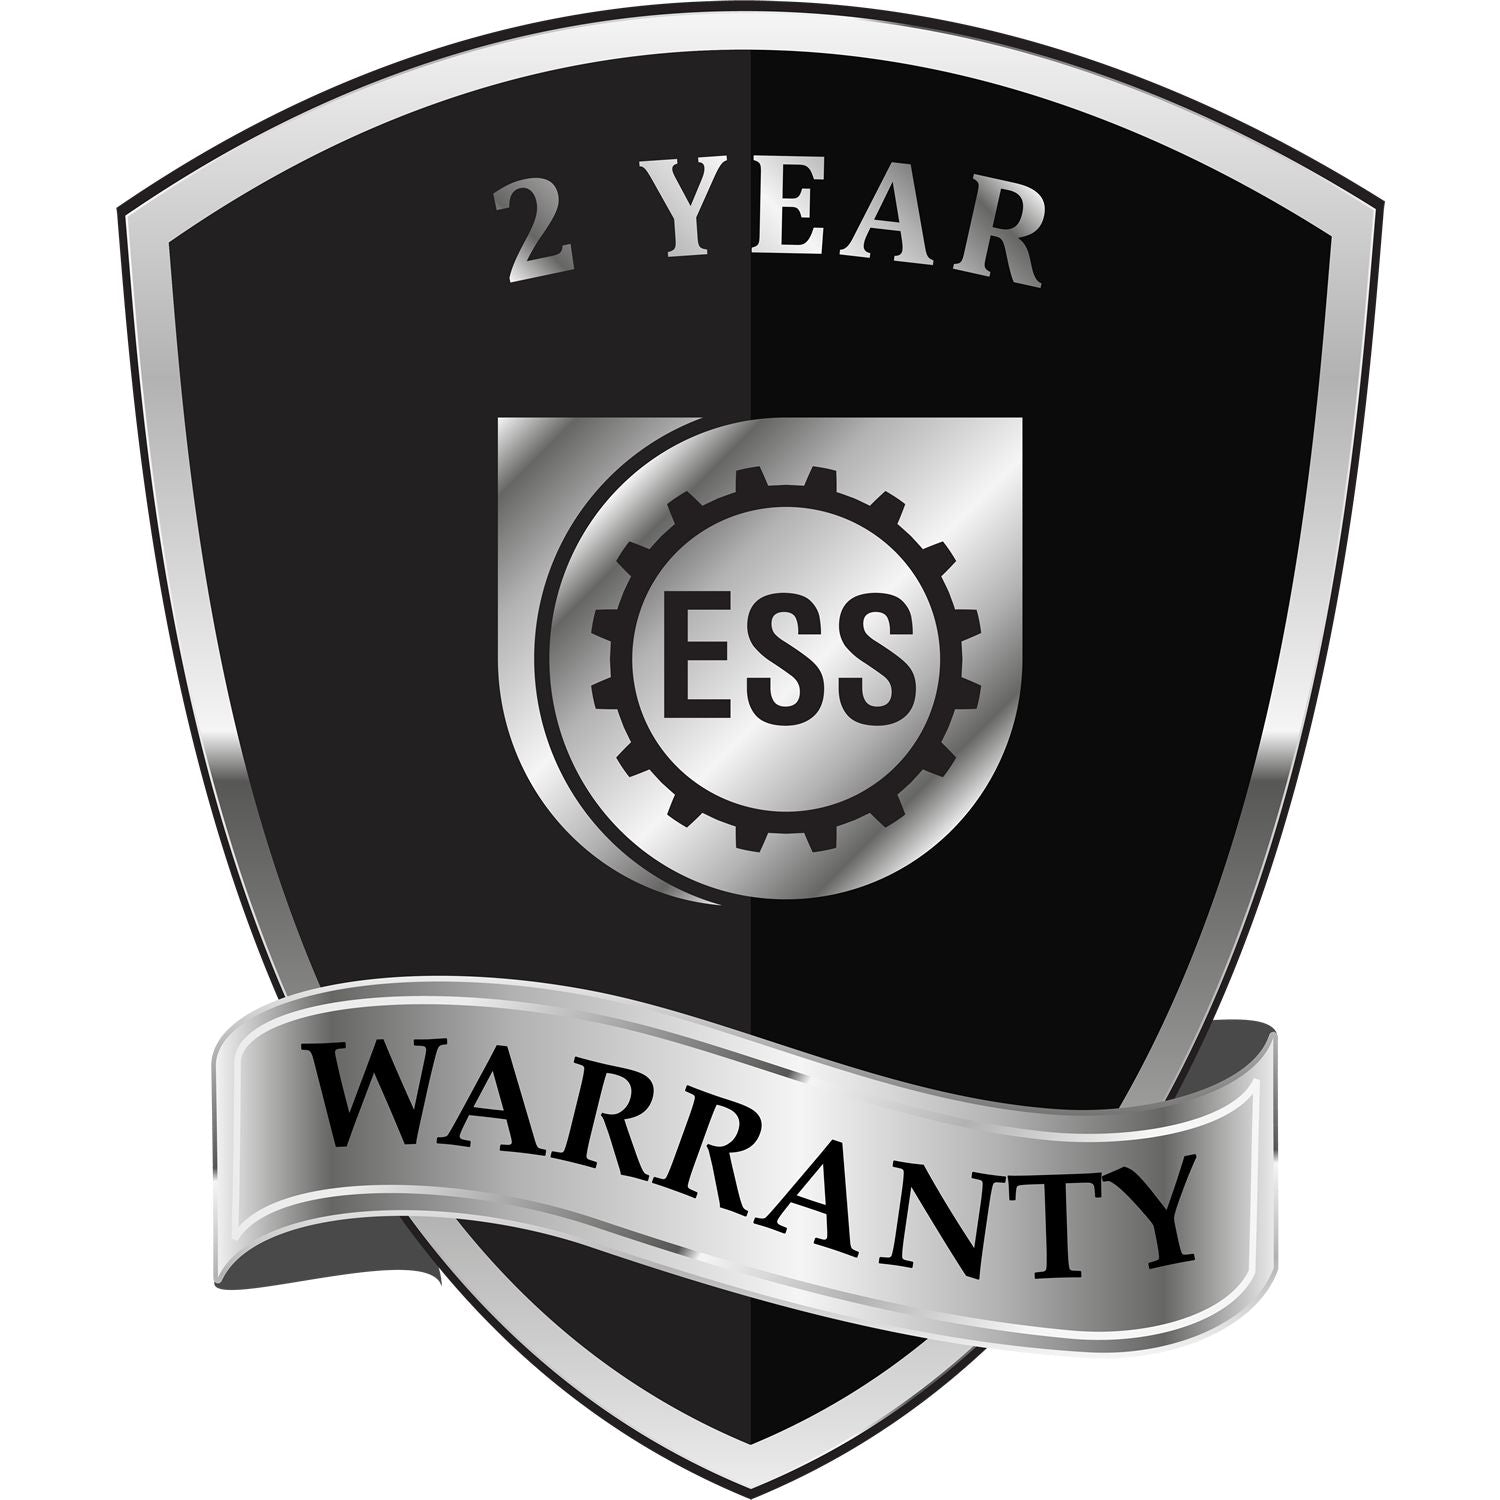 A badge or emblem showing a warranty icon for the Heavy Duty Cast Iron Colorado Engineer Seal Embosser